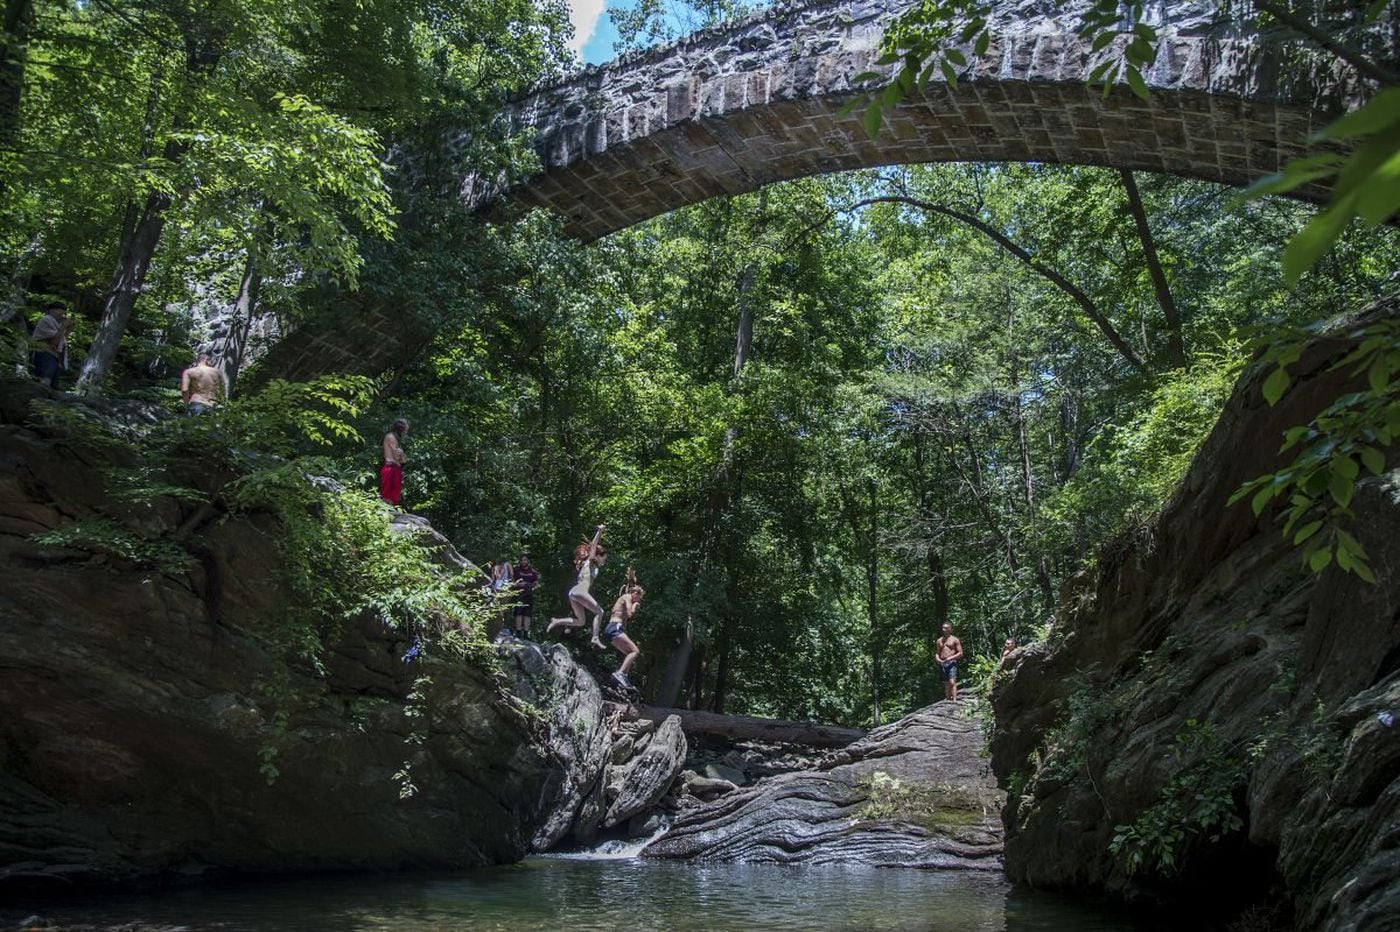 Philadelphia to close Devil’s Pool on weekends to ‘ensure public safety’